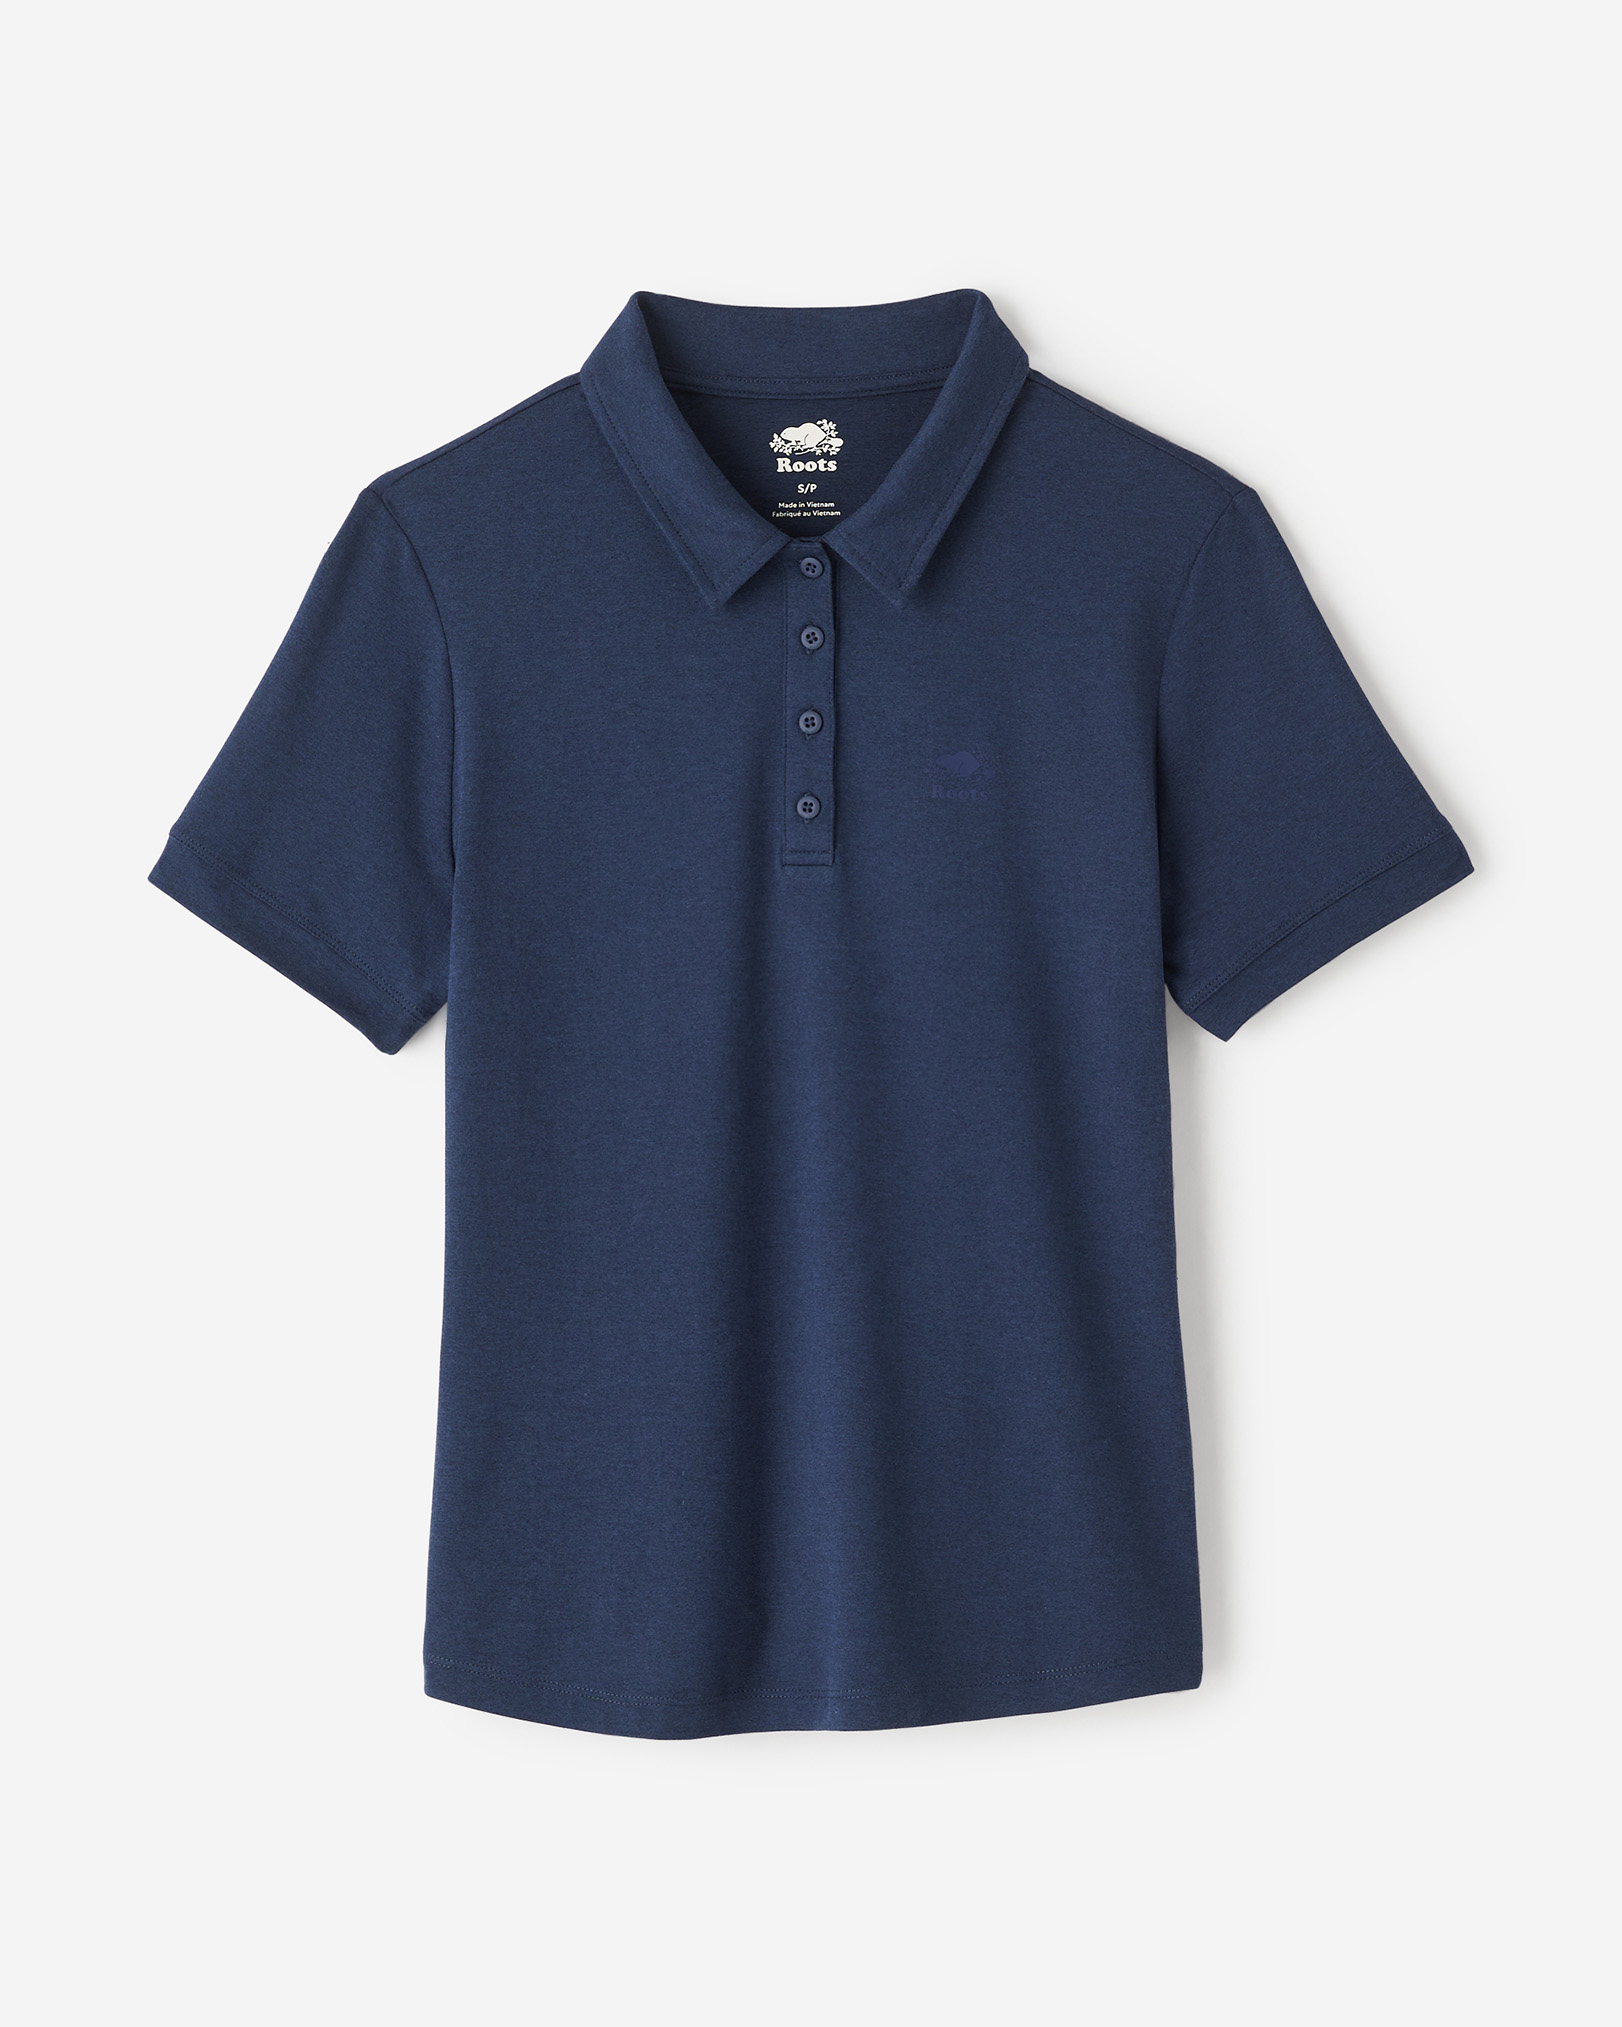 Roots Renew Short Sleeve Polo T-Shirt in Navy Blazer Mix